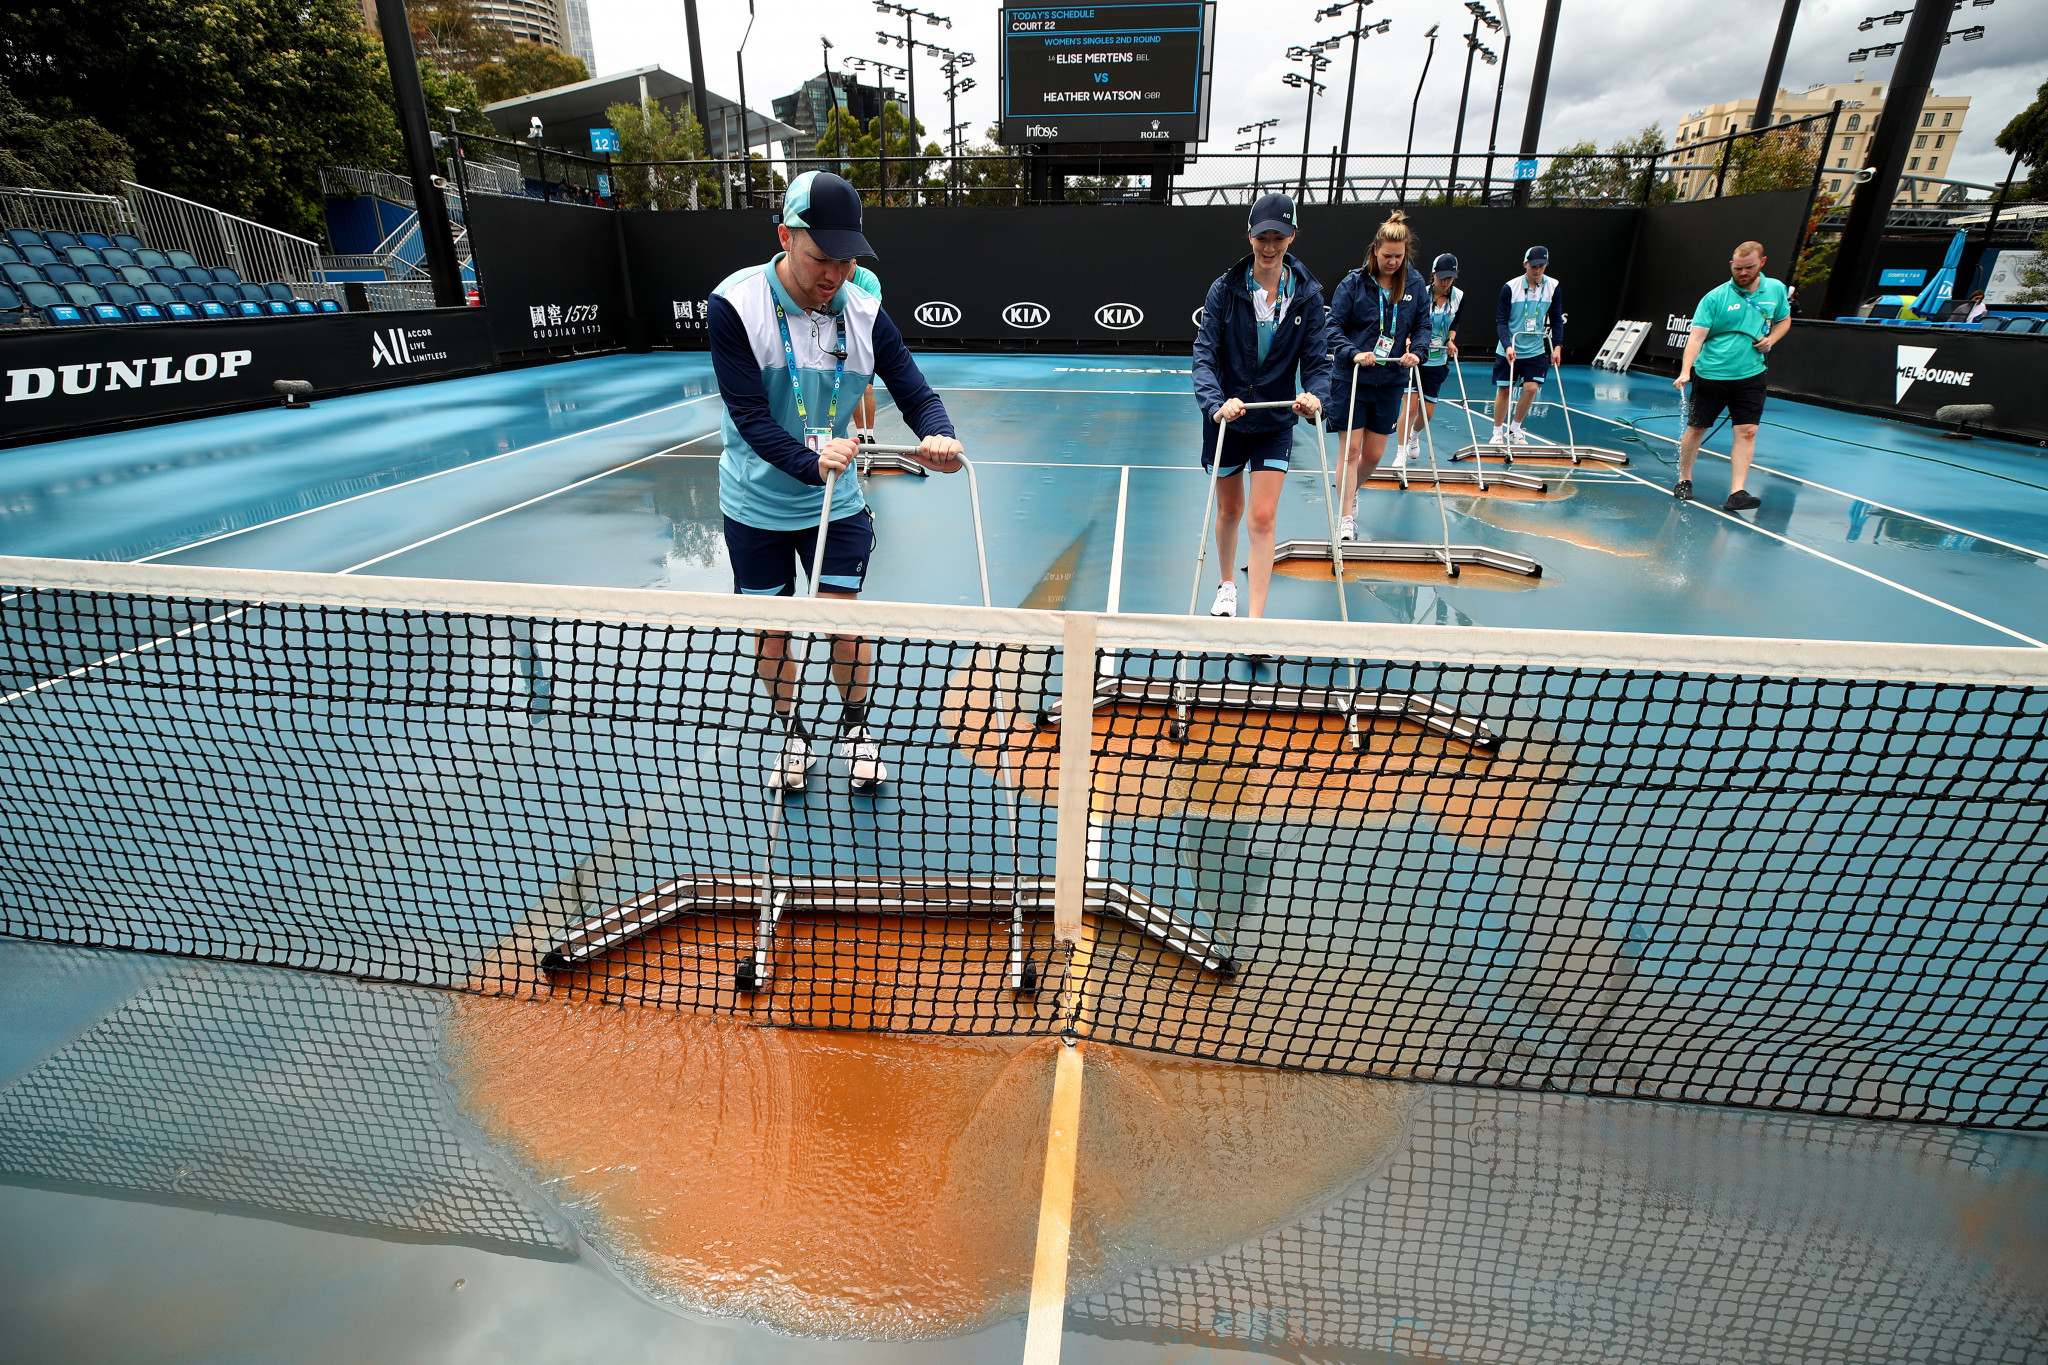 Heavy rainfall deposited dust on day four of the Australian Open, delaying play on the outside courts ©Getty Images